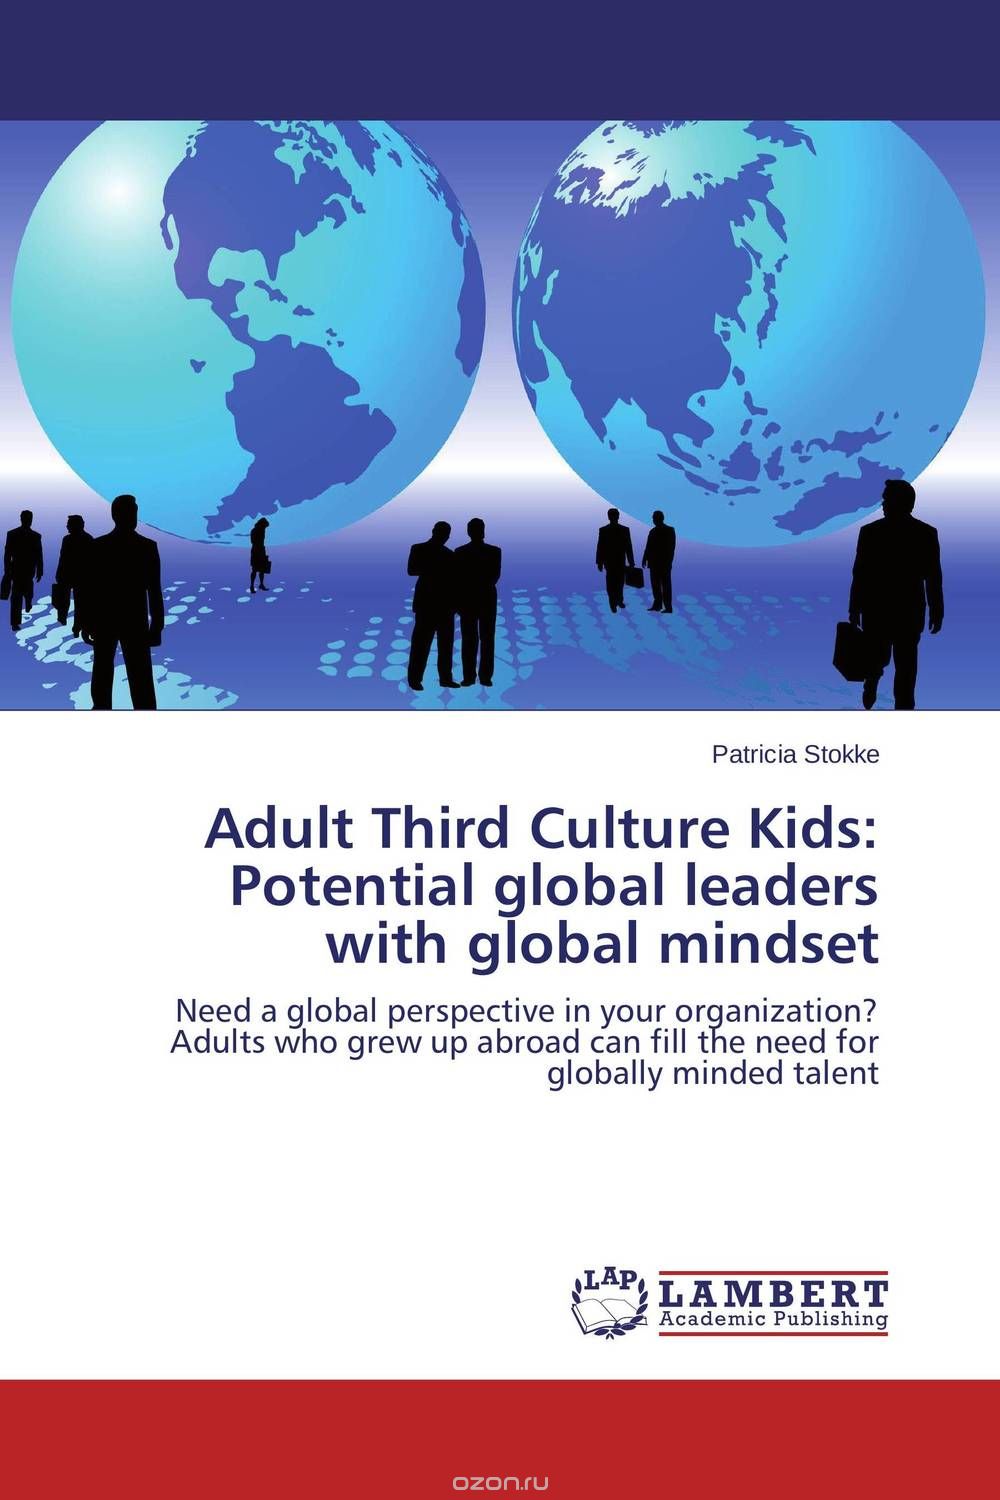 Adult Third Culture Kids: Potential global leaders with global mindset